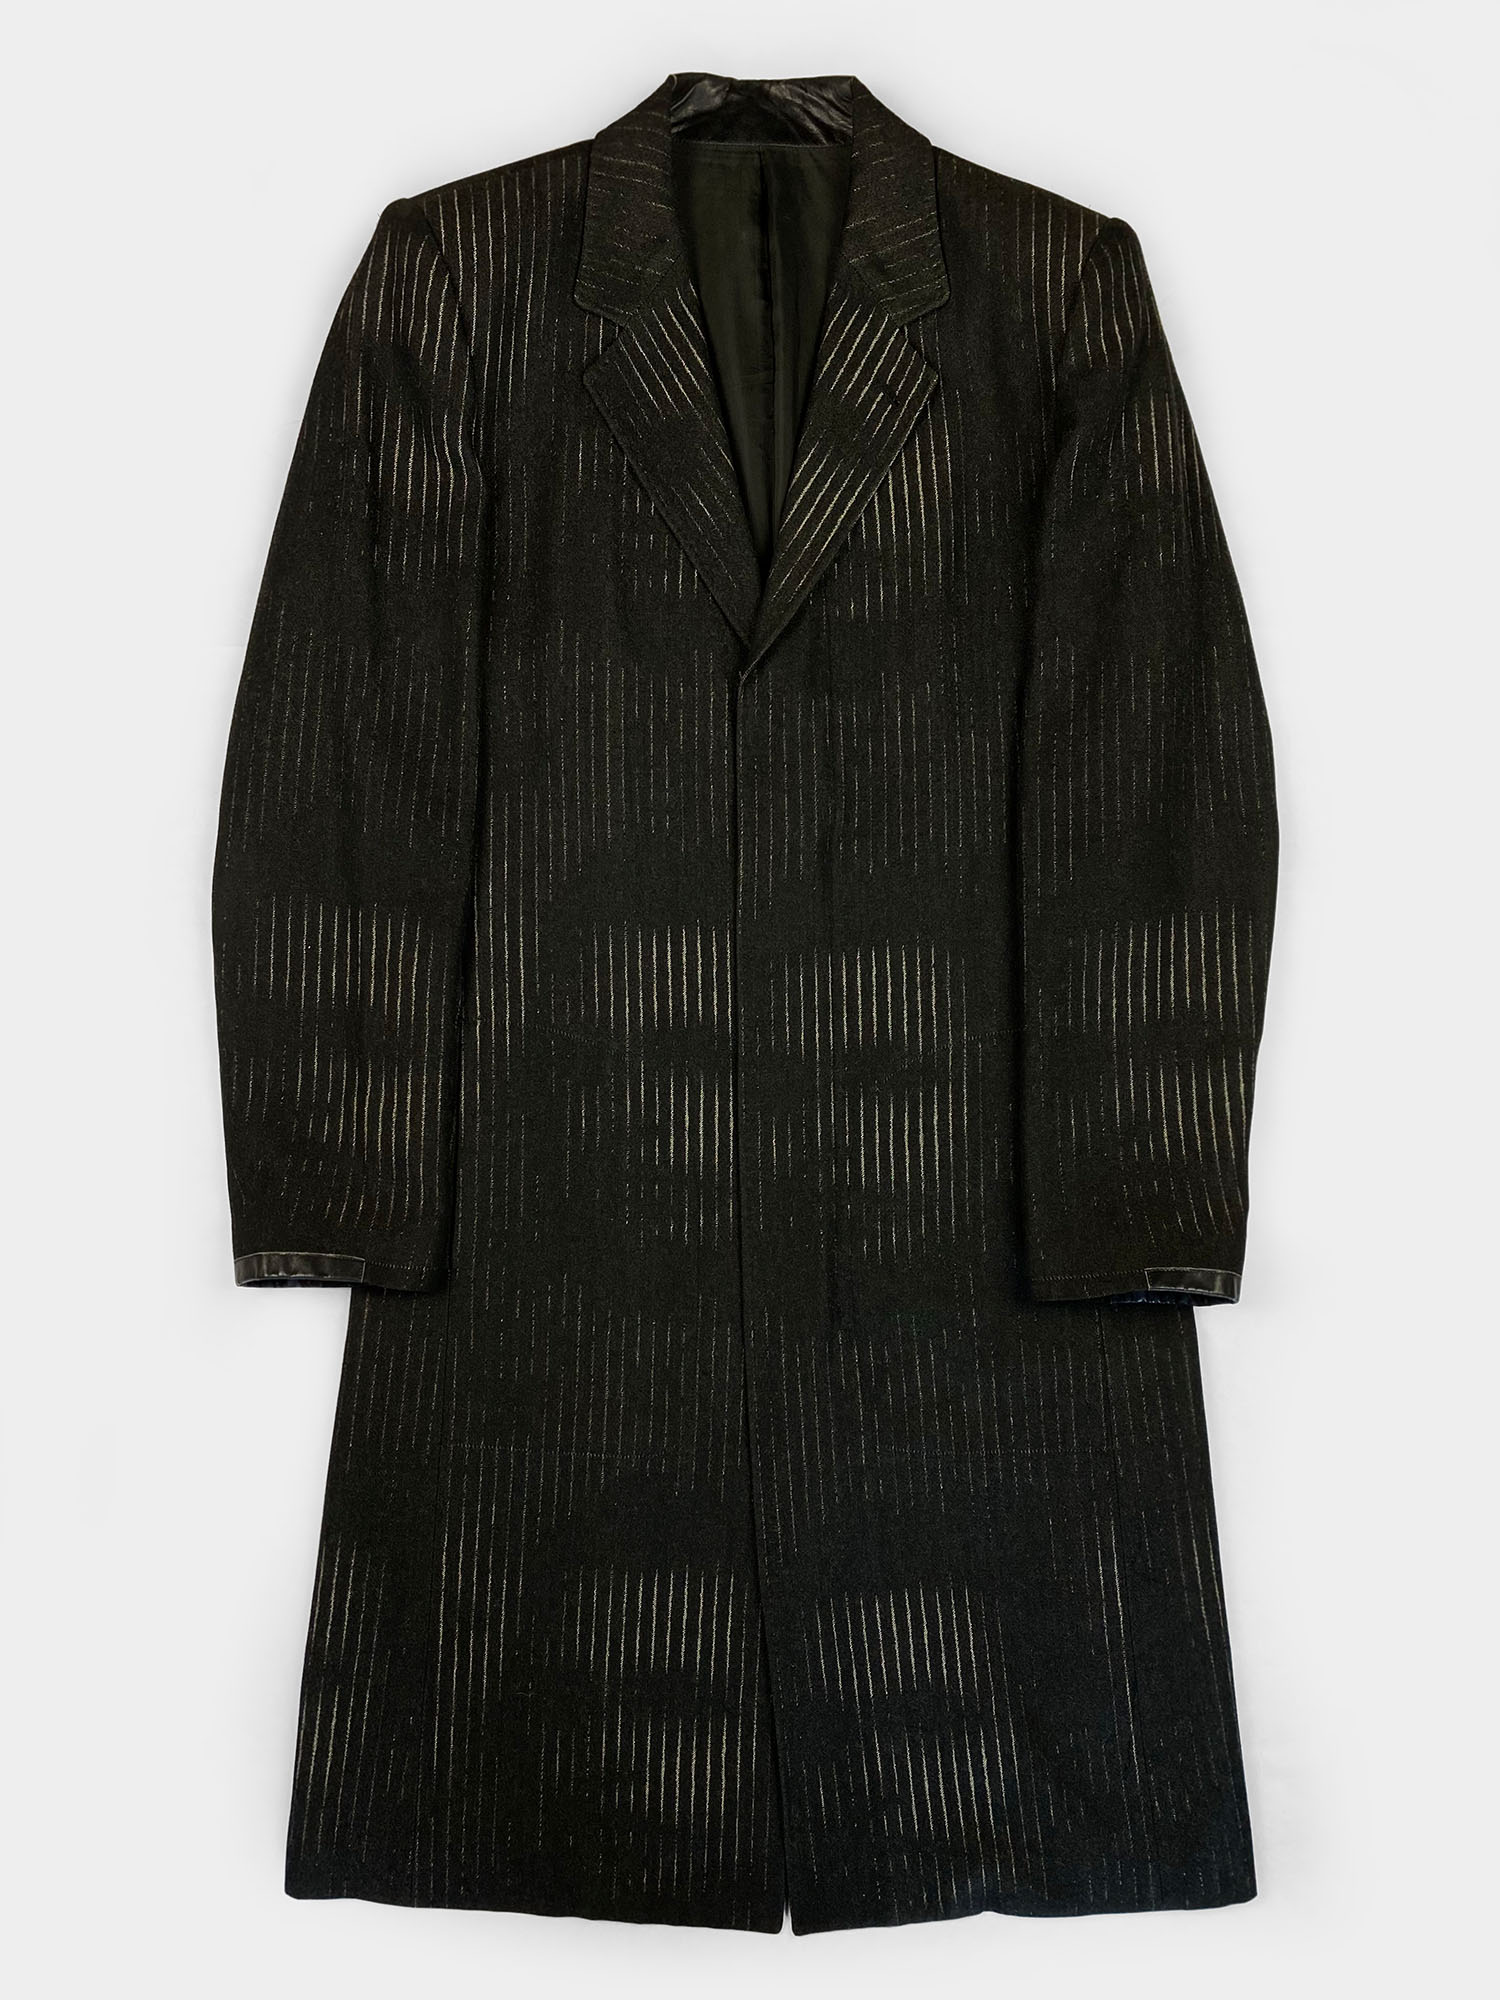 JEAN PAUL GAULTIER A/W01 Optical Illusion Faces Coat - ARCHIVED